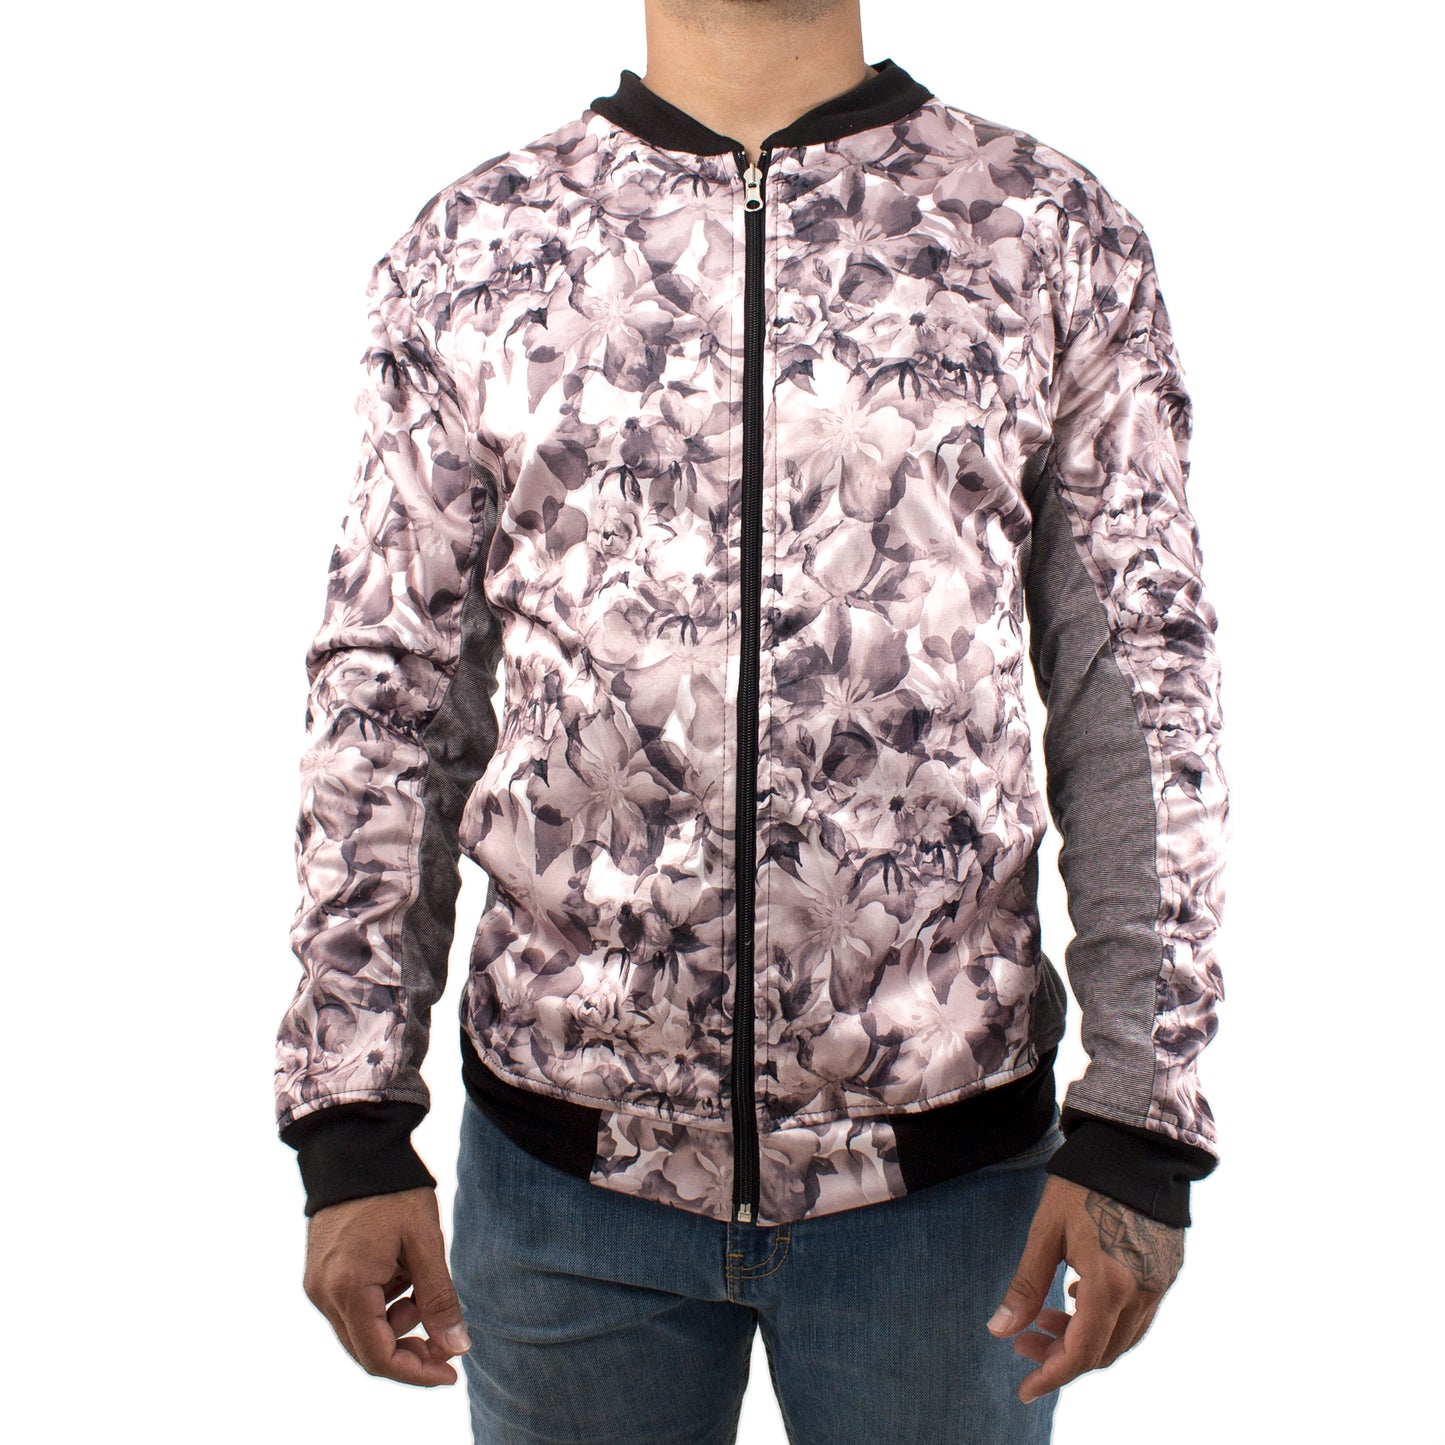 BJ0011 Ethereal Valley Jacket